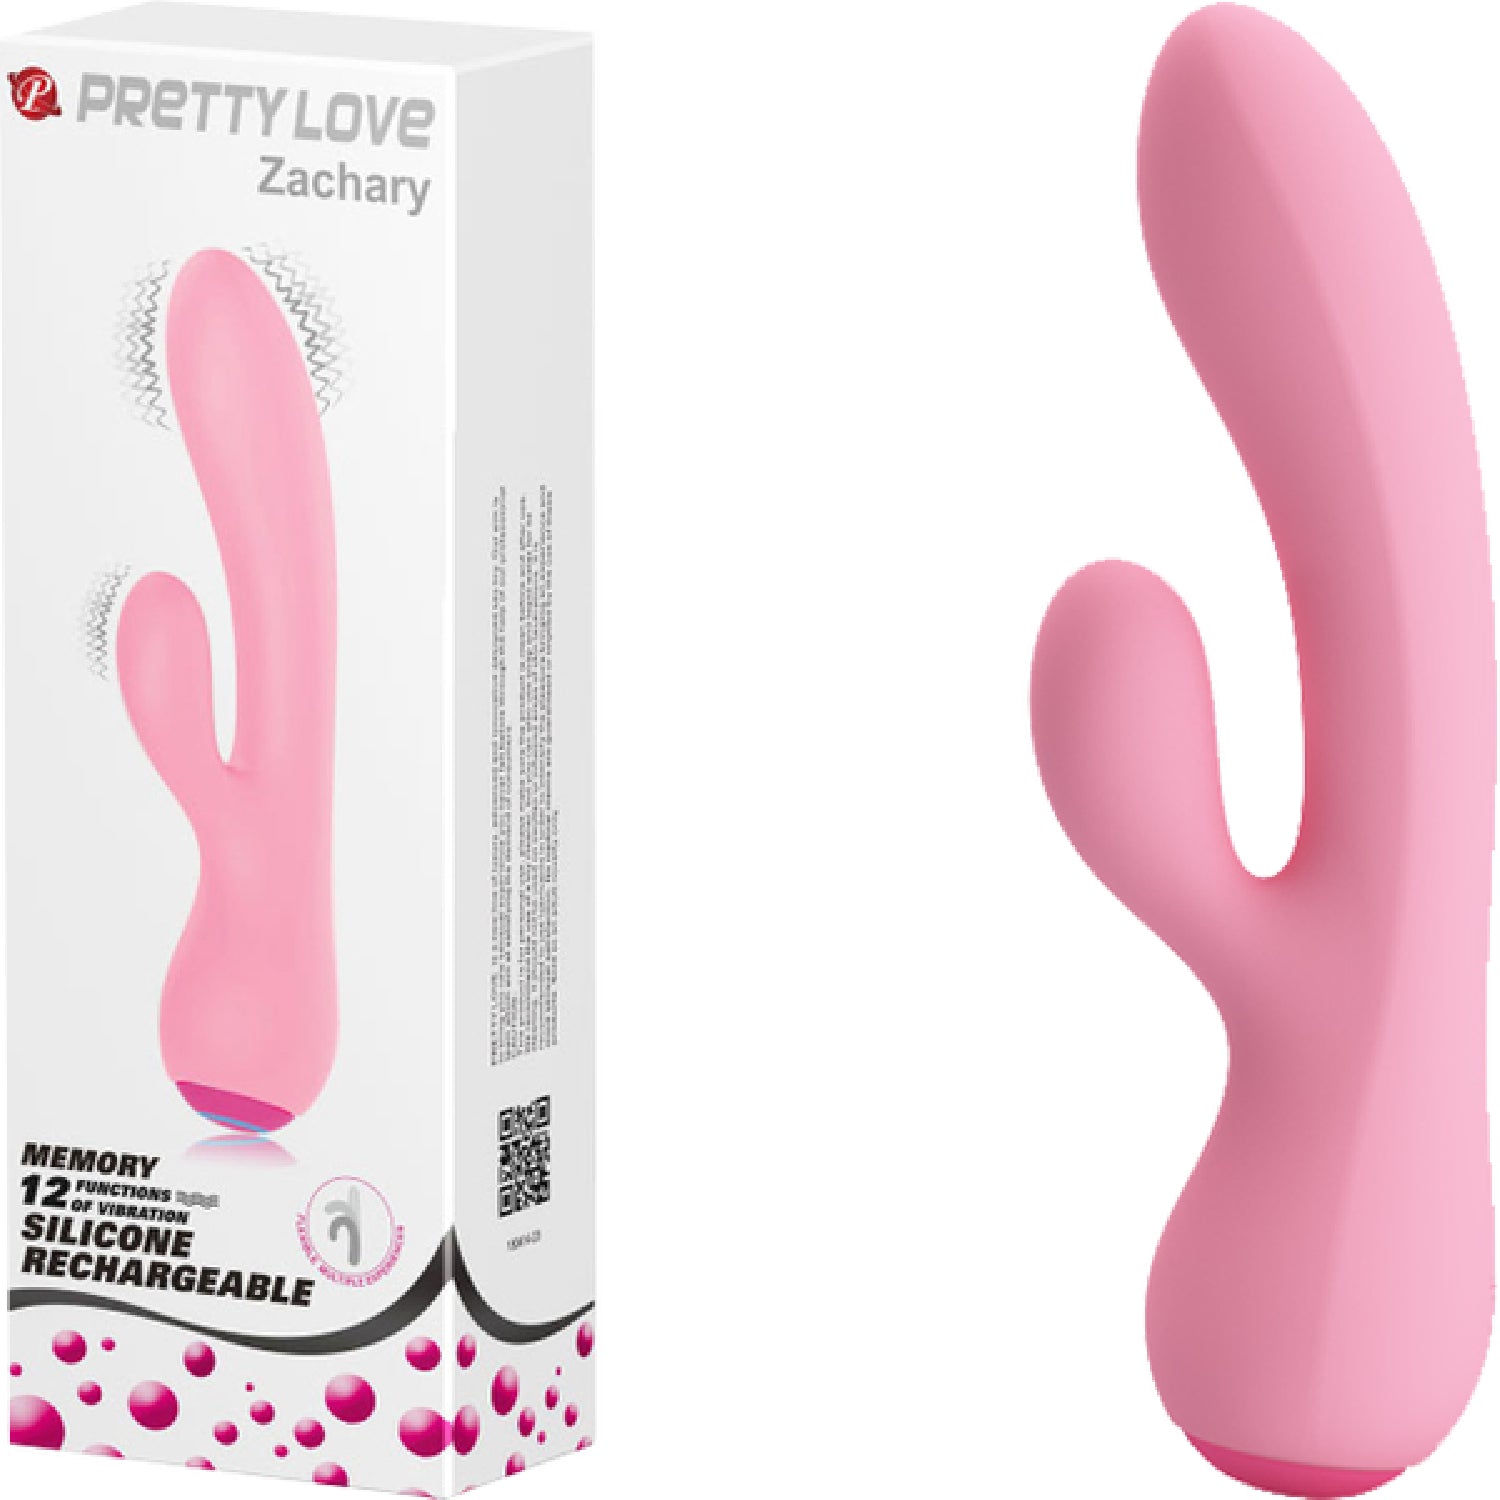 Rechargeable Zachary (Pink)